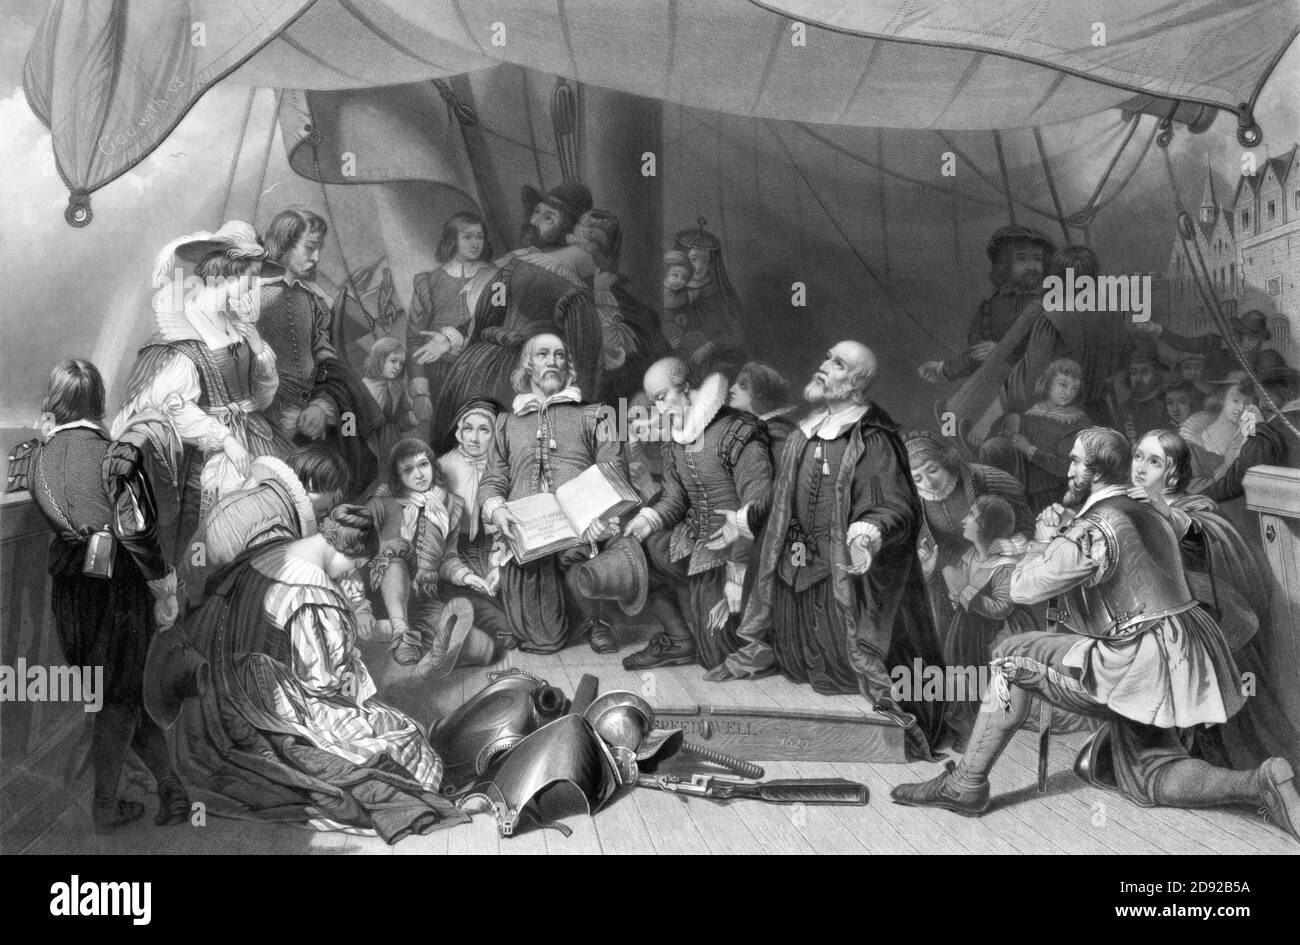 Embarkation of the Pilgrims, engraving by Samuel Bellin from a painting by Robert W. Weir, 1844. Myles Standish (c. 1584-1656) is shown in the right foreground with his wife, Rose. Stock Photo